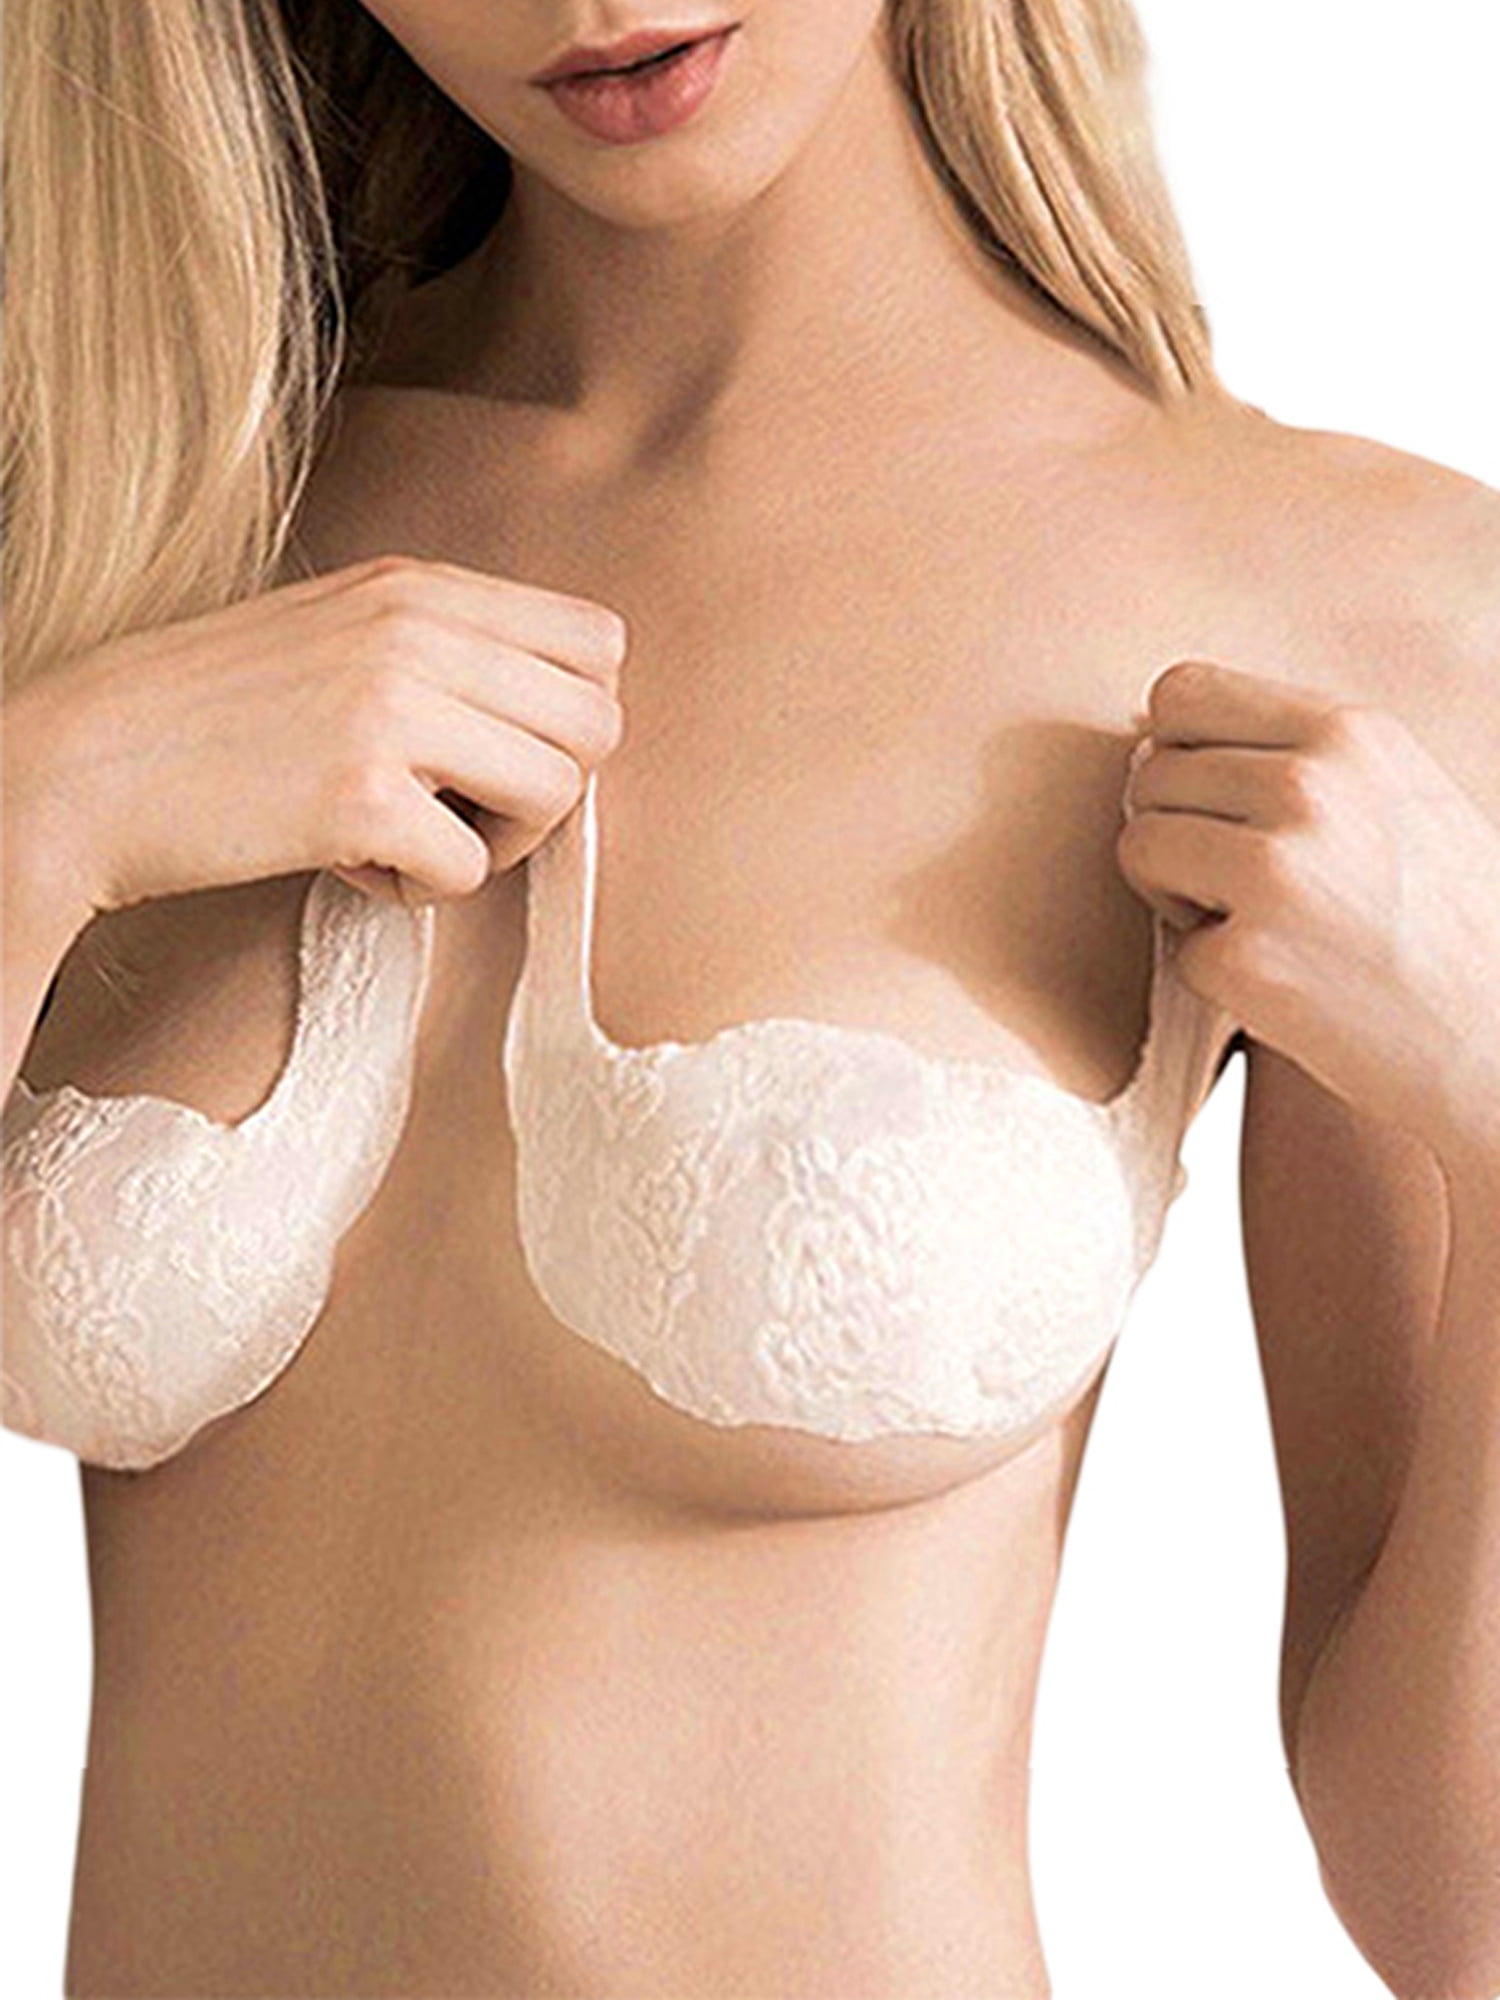 JBEELATE Self Adhesive Disposable Backless Strapless Lace Bra